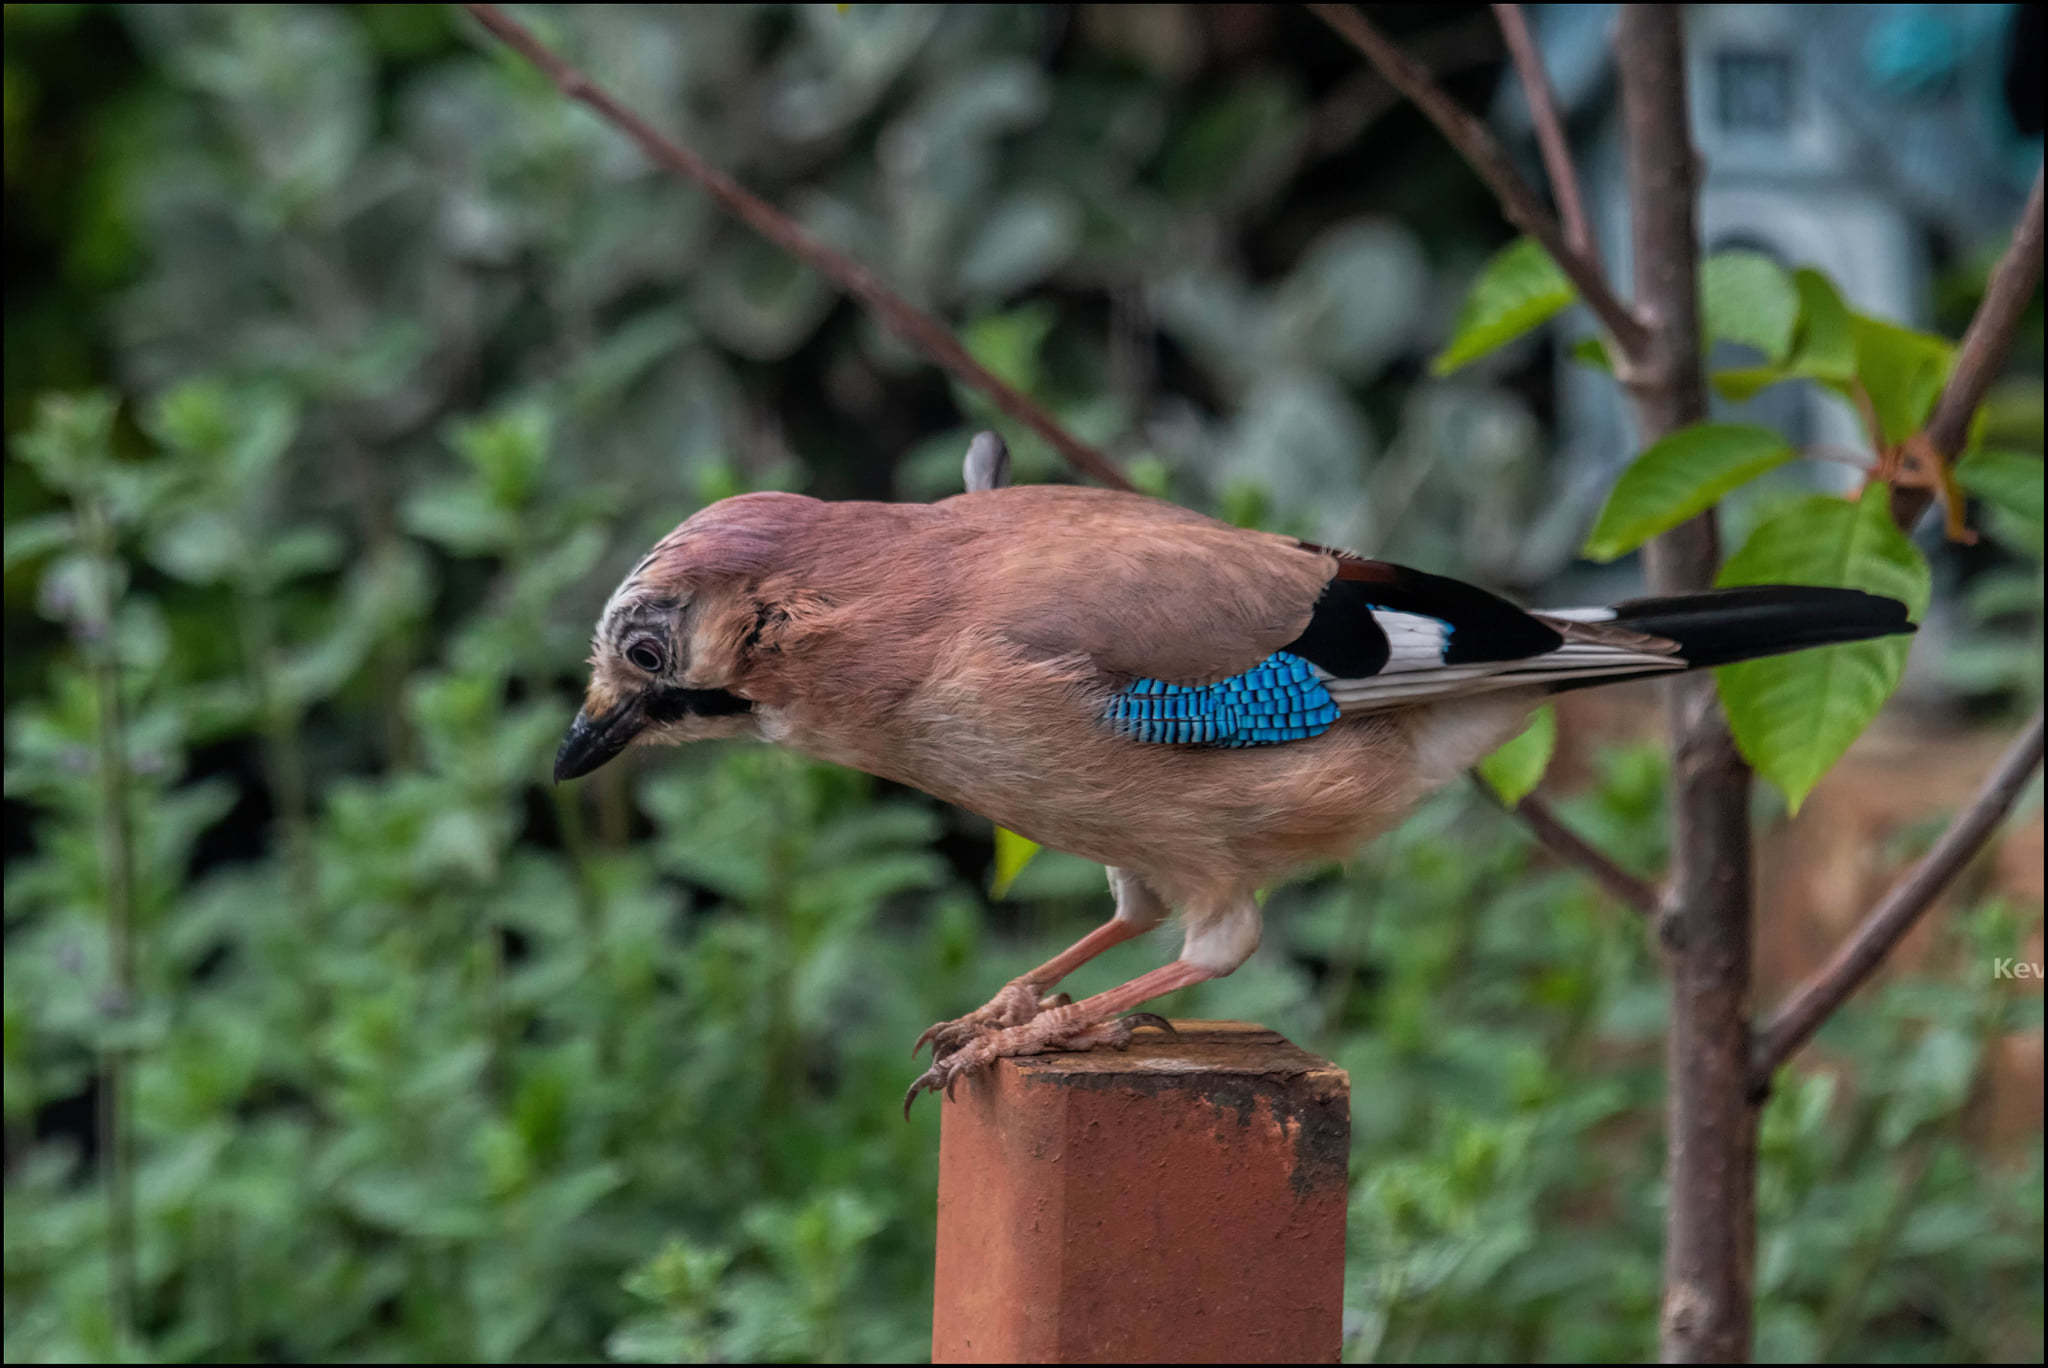 Kevin Long saw this ‘beautiful Eurasian jay’ in his garden over several days